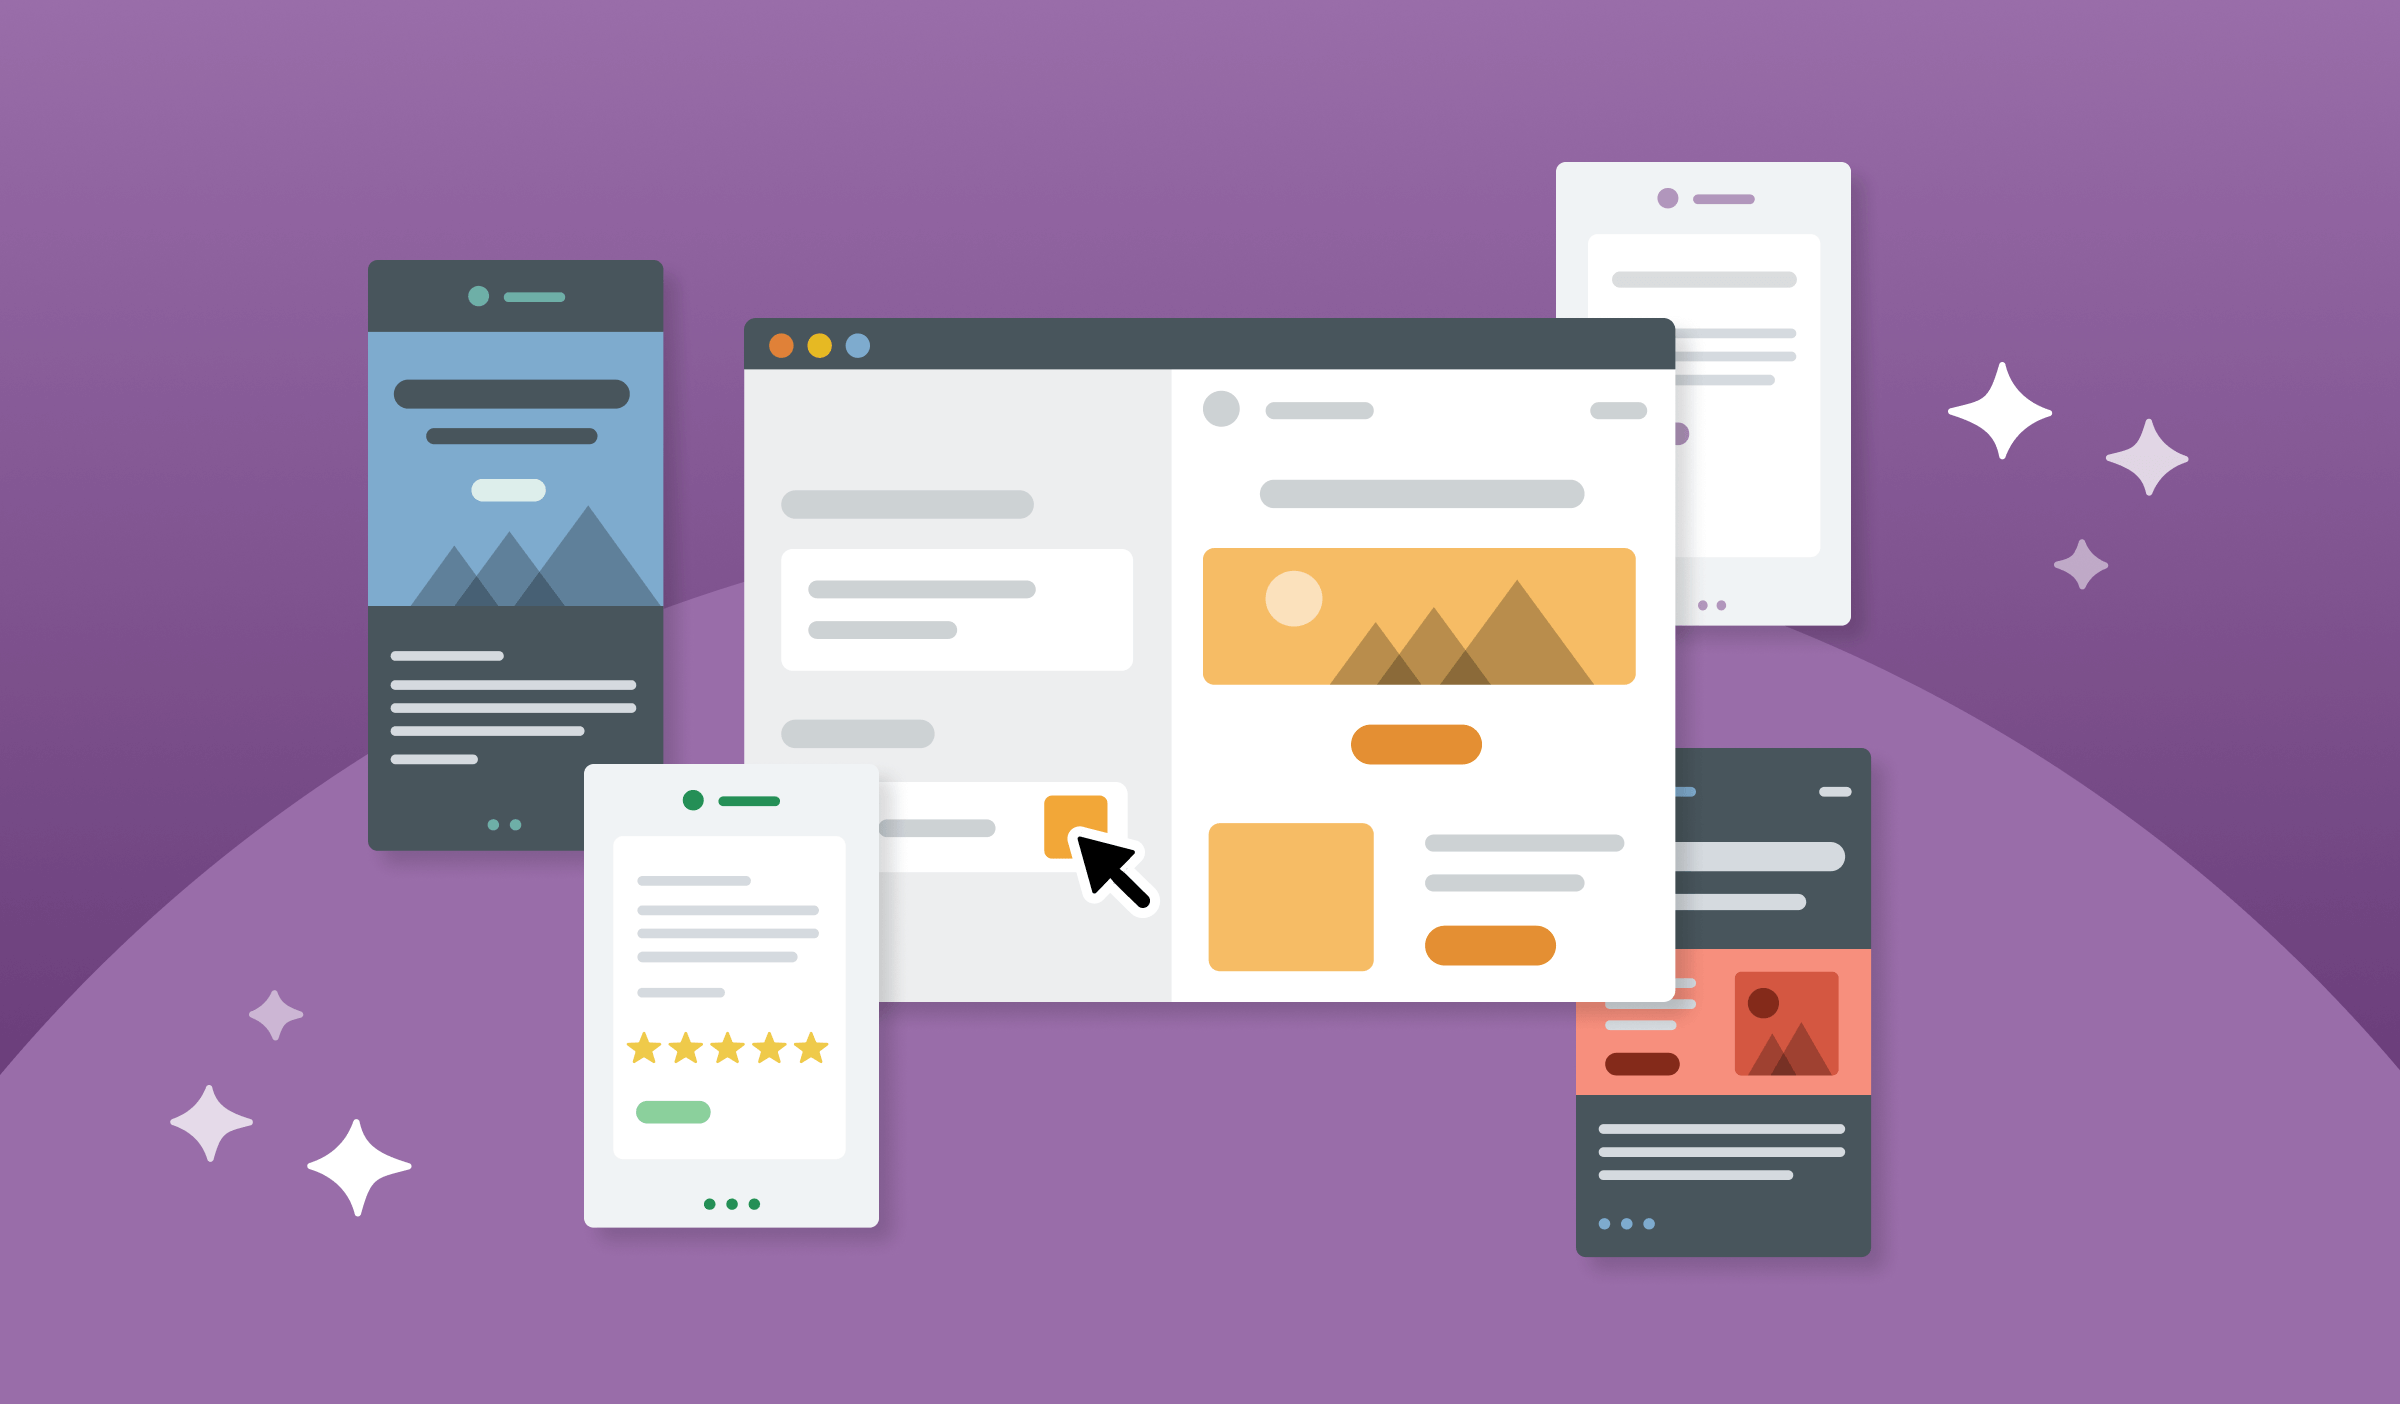 Five different types of email templates: A Dark Mode mobile template, a customer testimonial mobile template, an image-led desktop template, and two more mobile friendly templates.